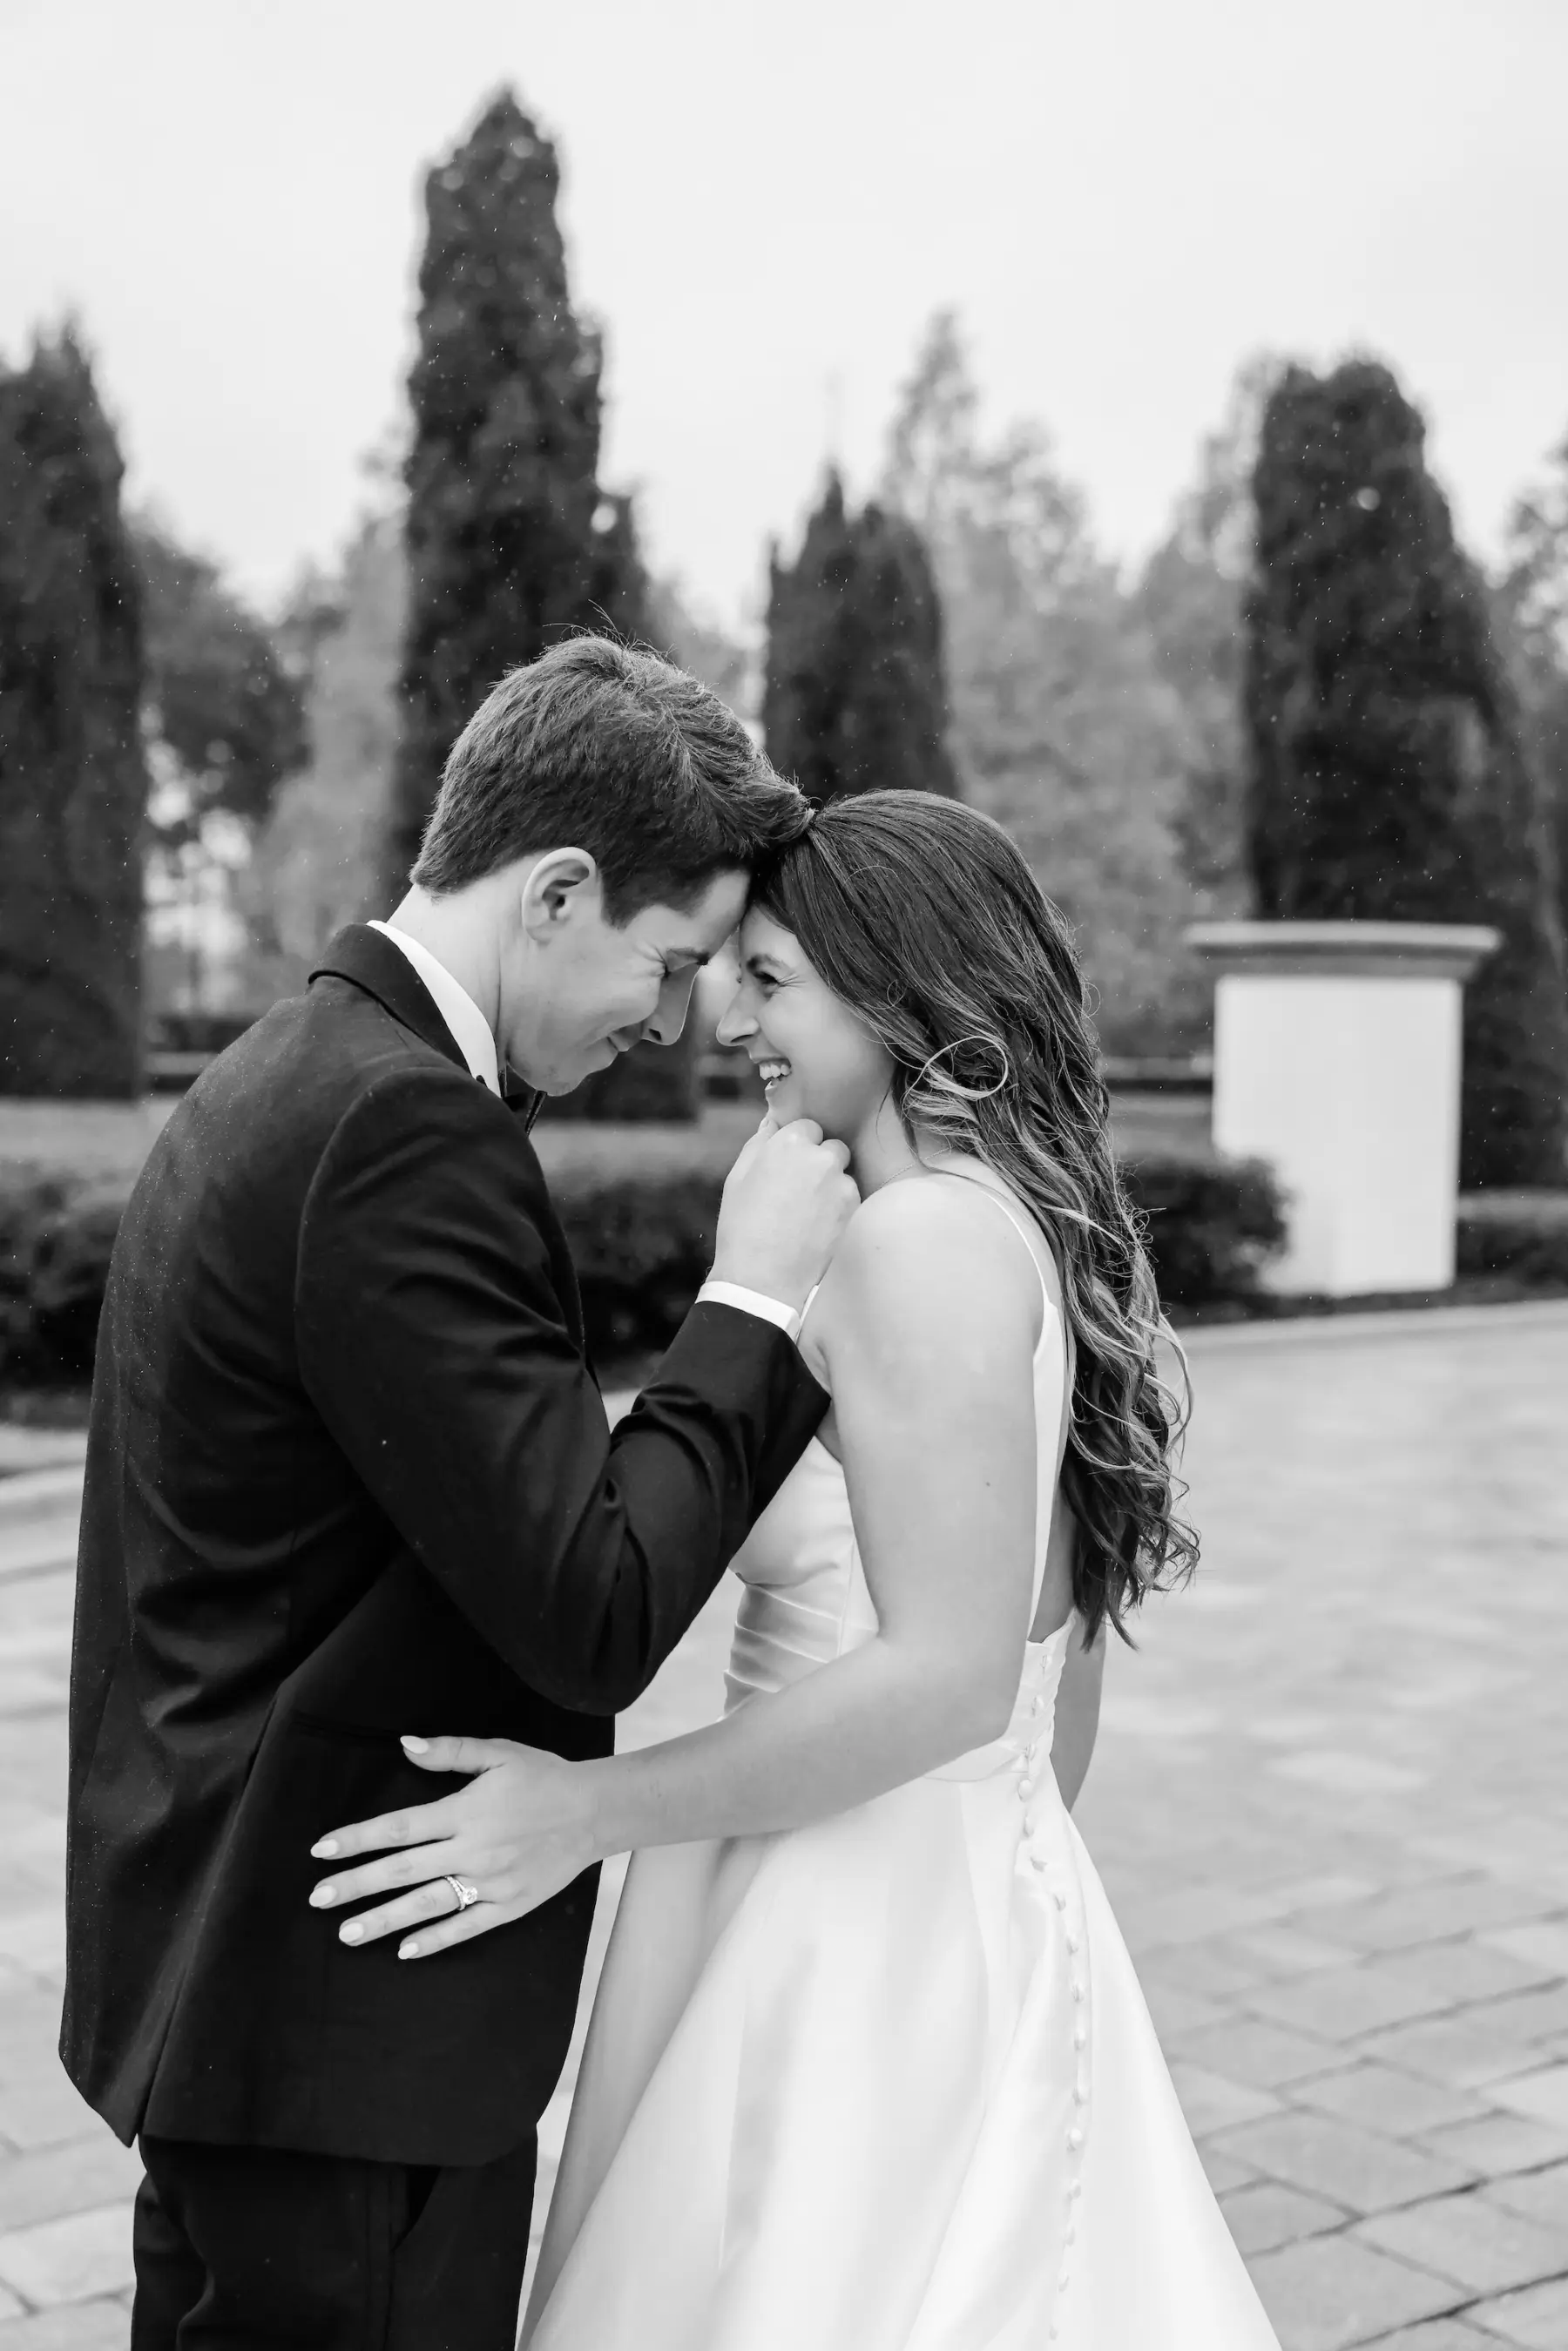 Bride and Groom Just Married Black and White Wedding Portrait | Tampa Bay Photographer Lifelong Photography Studio